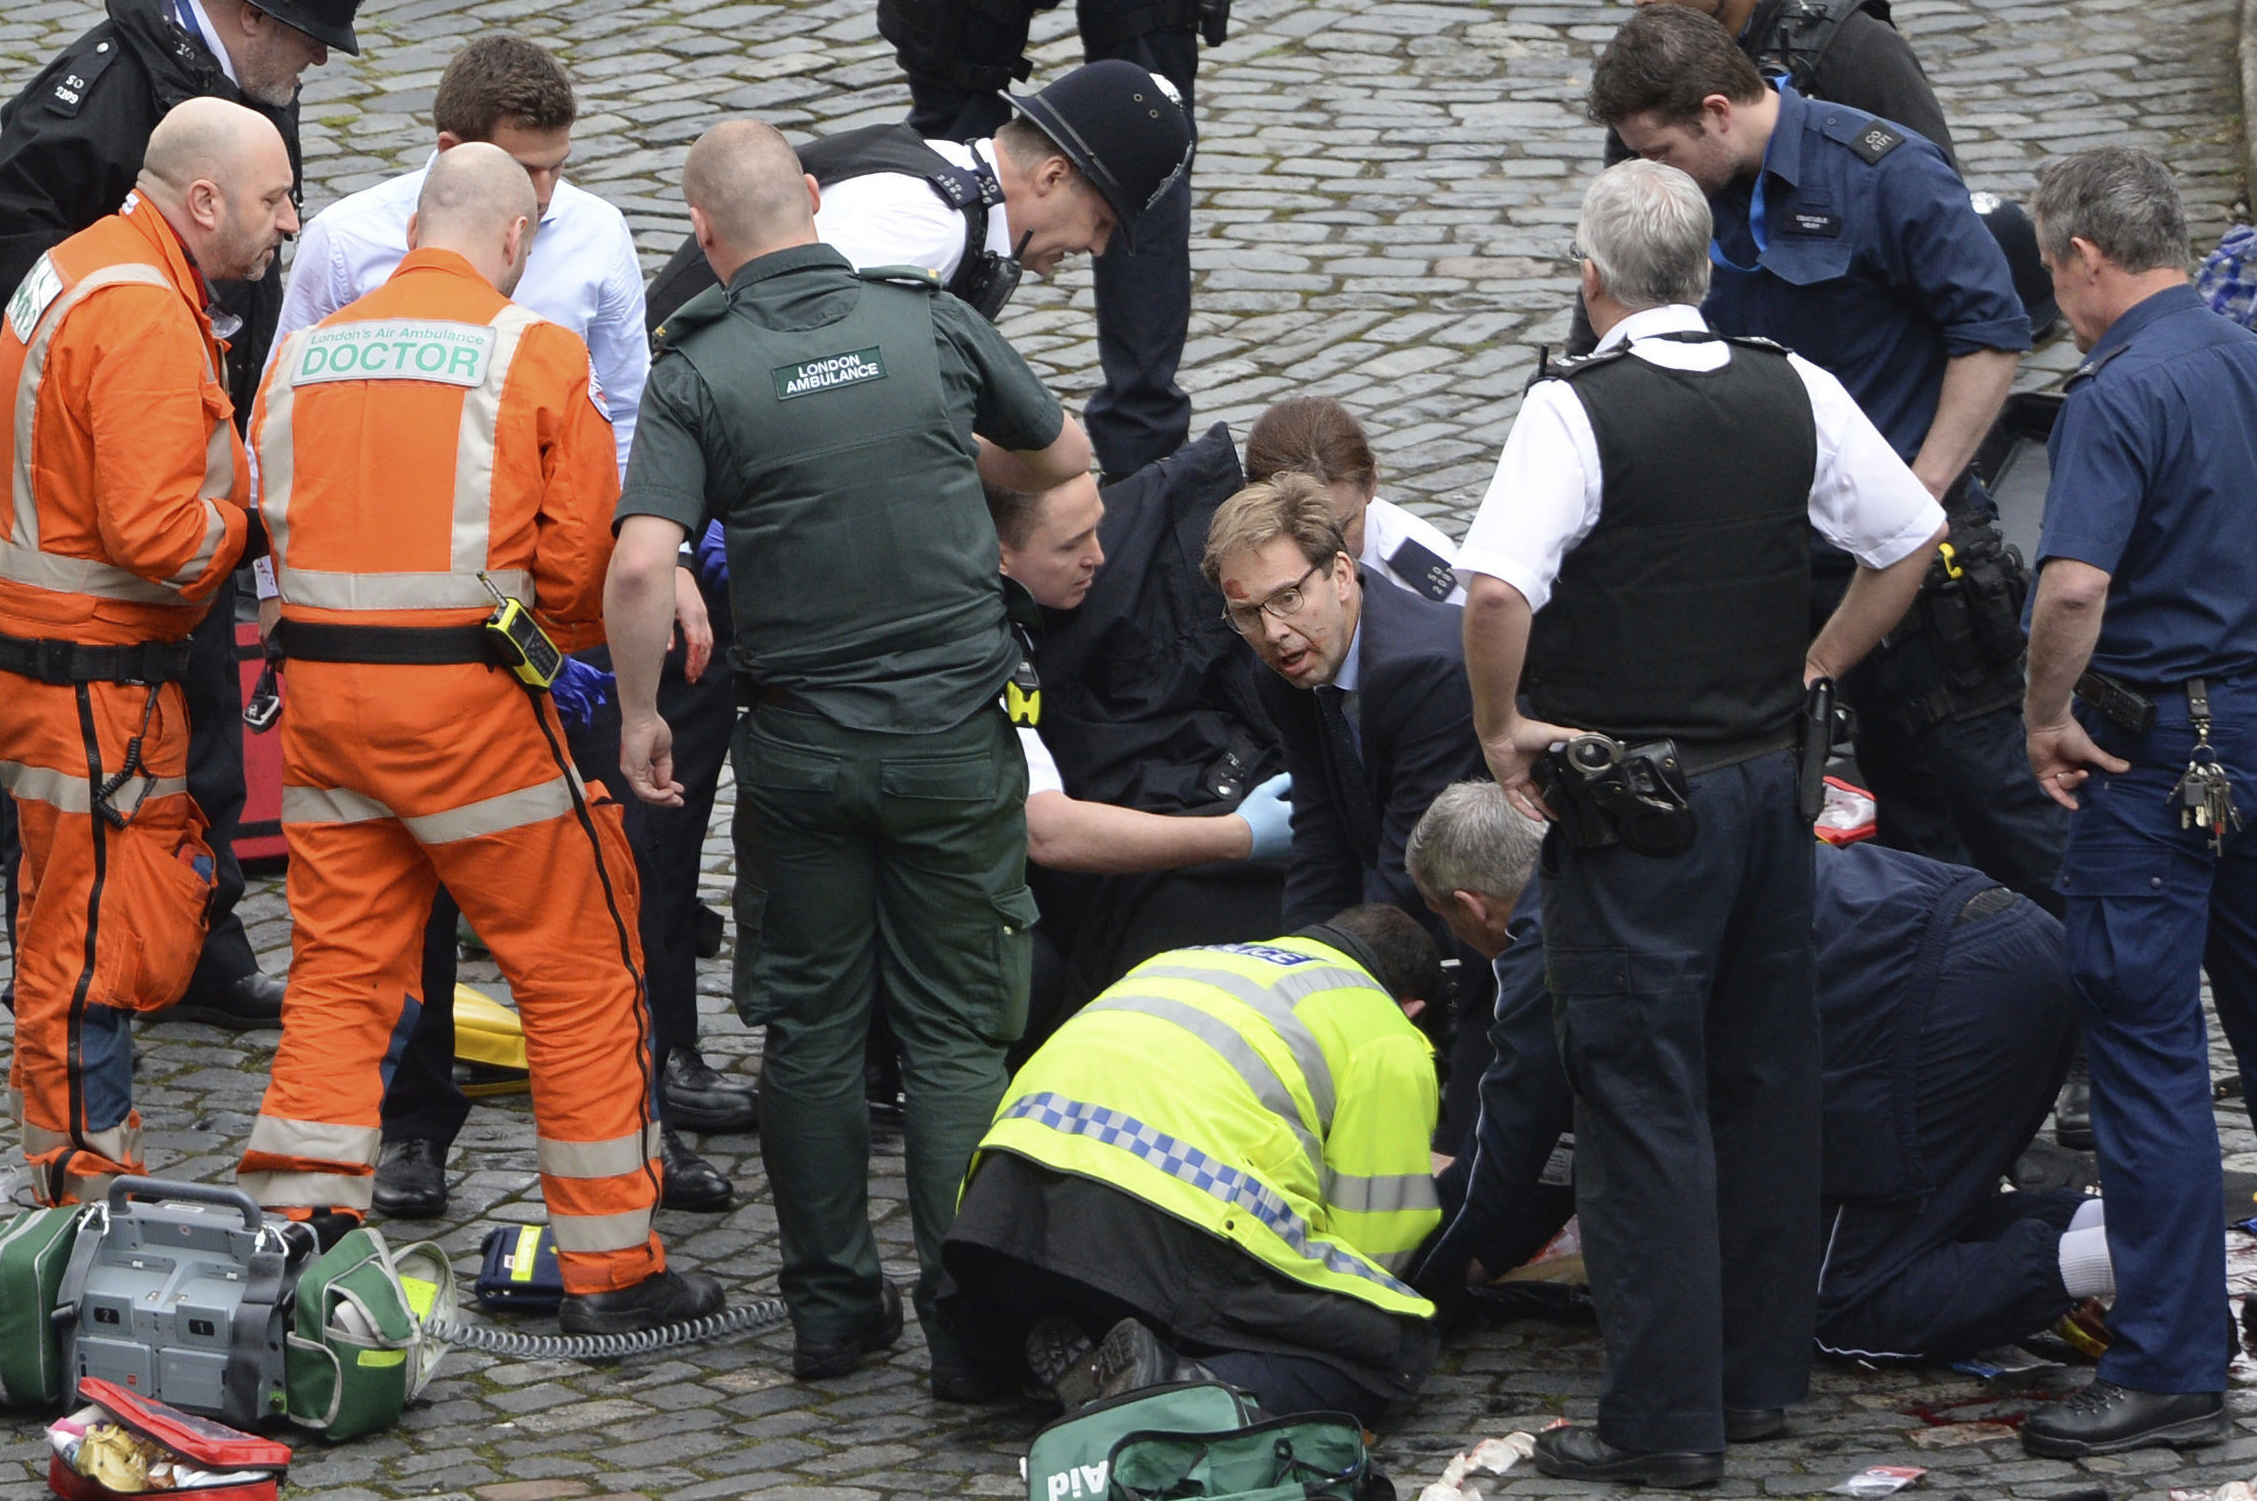 PHOTO: Conservative Member of Parliament Tobias Ellwood, center, helps emergency services attend to an injured person outside the Houses of Parliament, London, on March 22, 2017. 